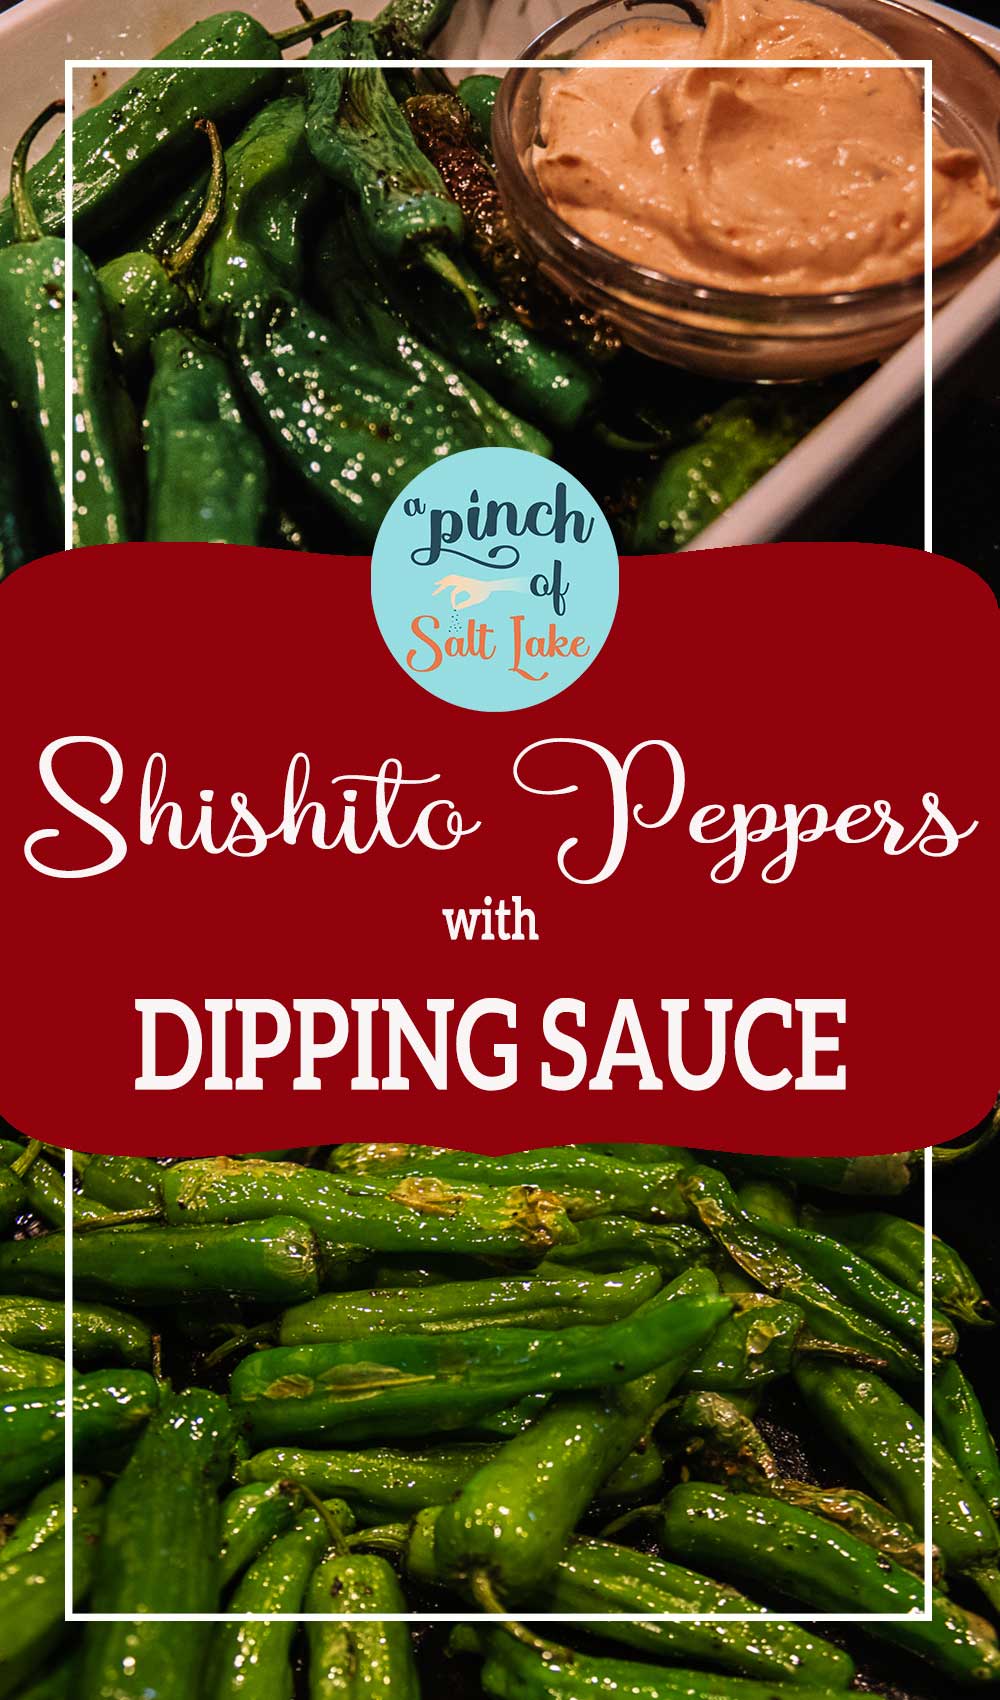 Blistered Shishito Peppers with Dipping Sauce - A Pinch of Salt Lake